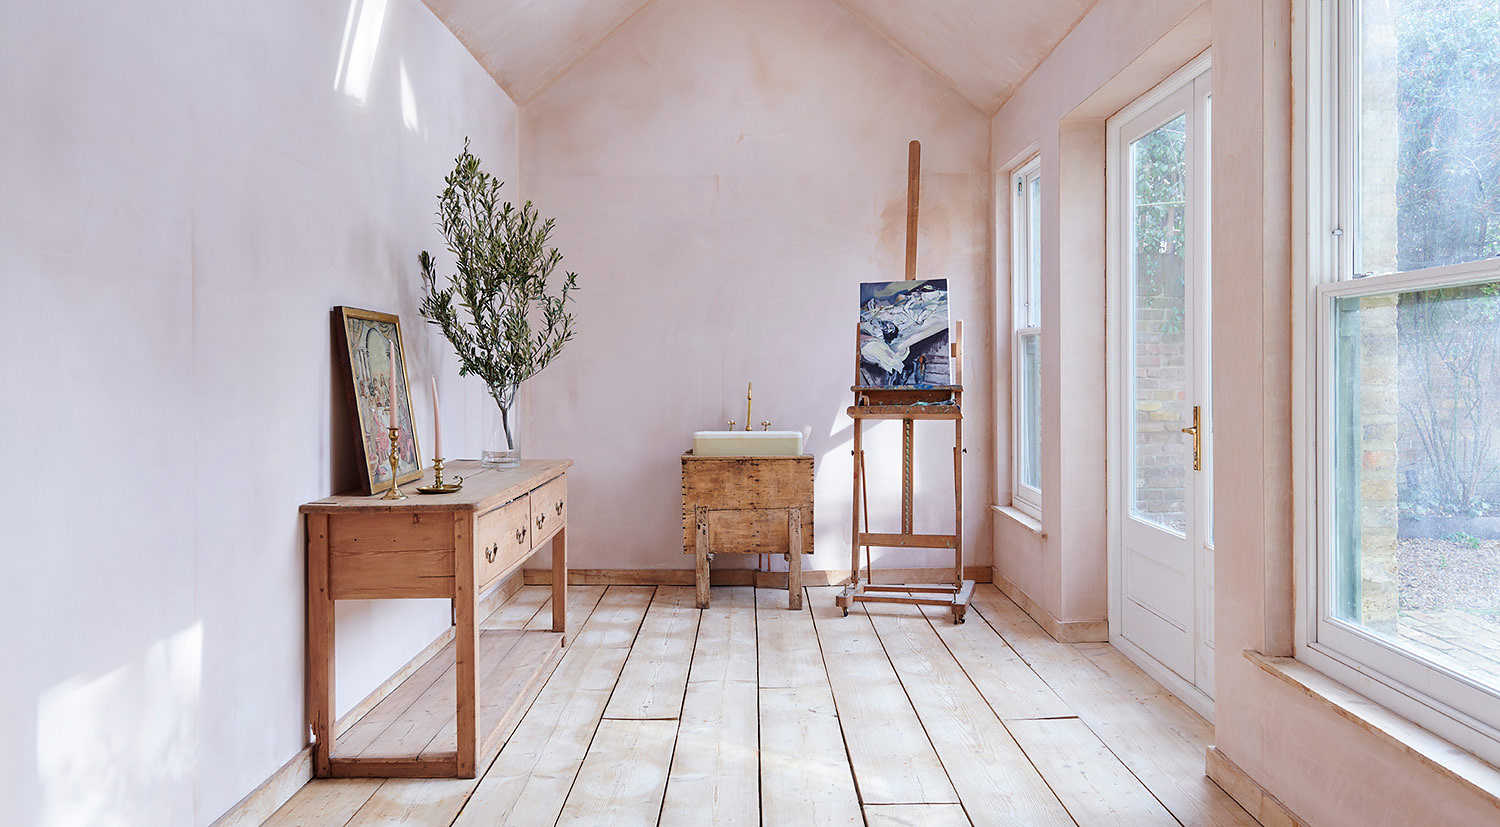 Artist studio with bare plaster walls, reclaimed wooden floorboards, pitched ceilings & skylights